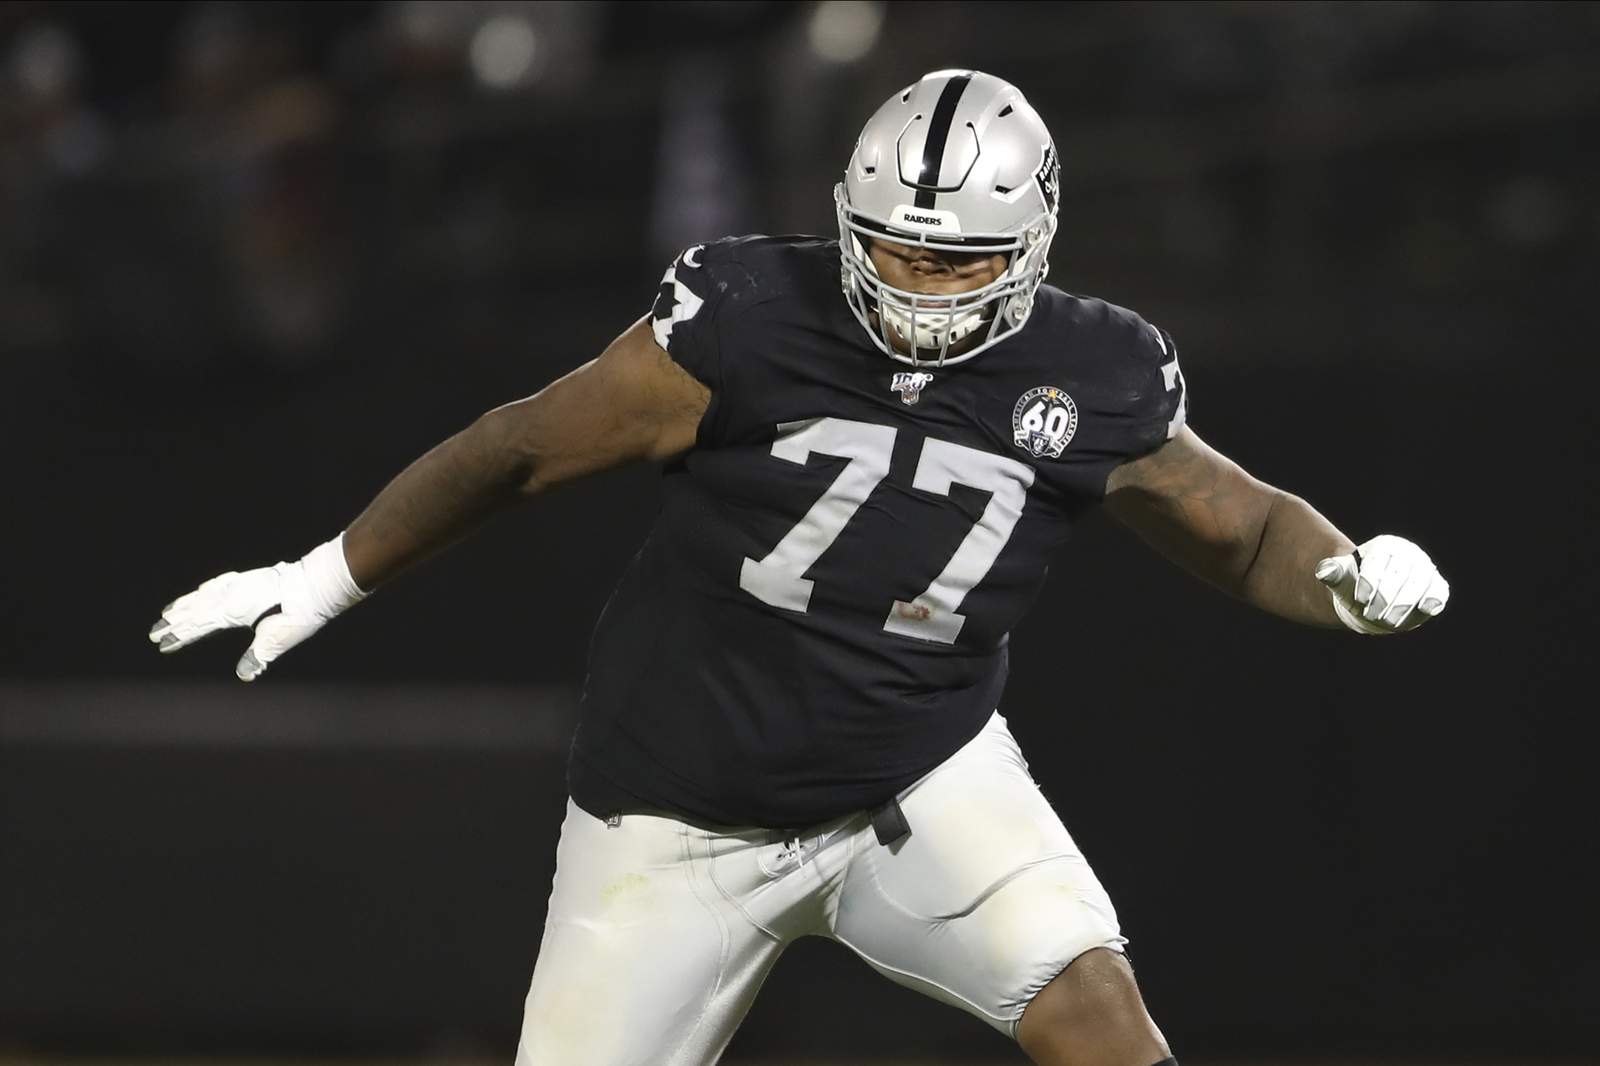 AP source: Raiders players test negative for COVID-19